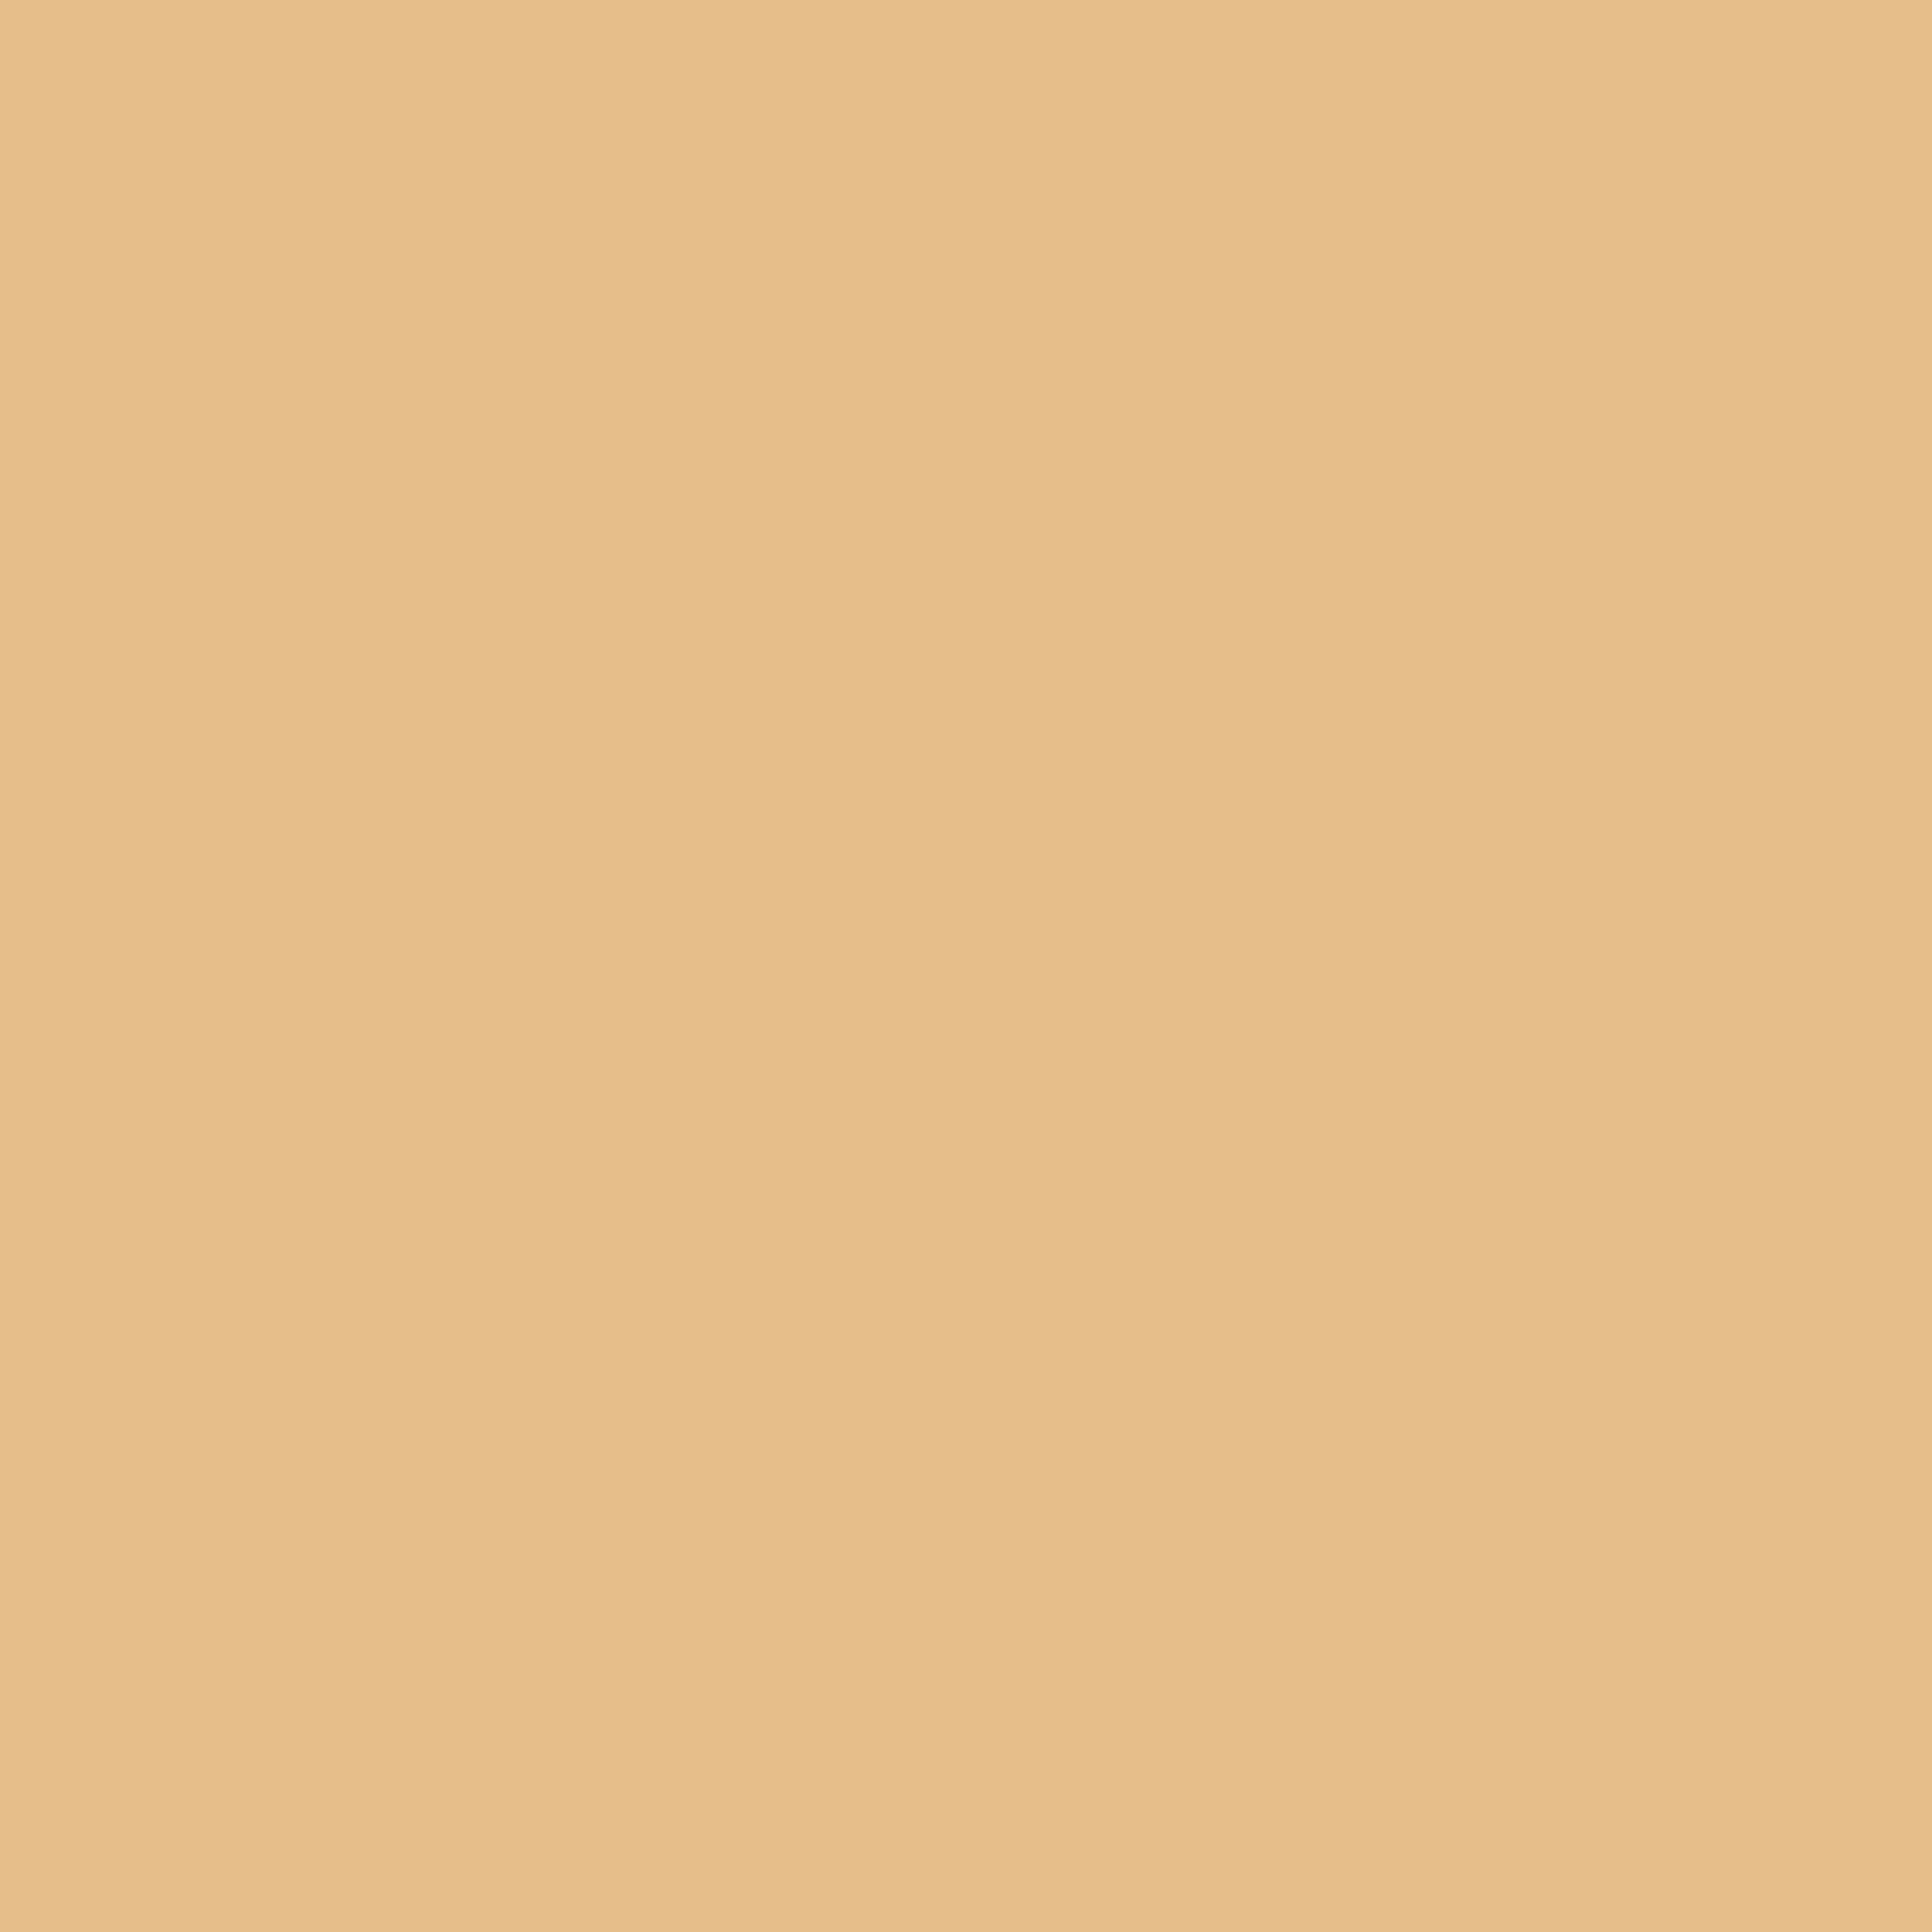 2732x2732 Pale Gold Solid Color Background